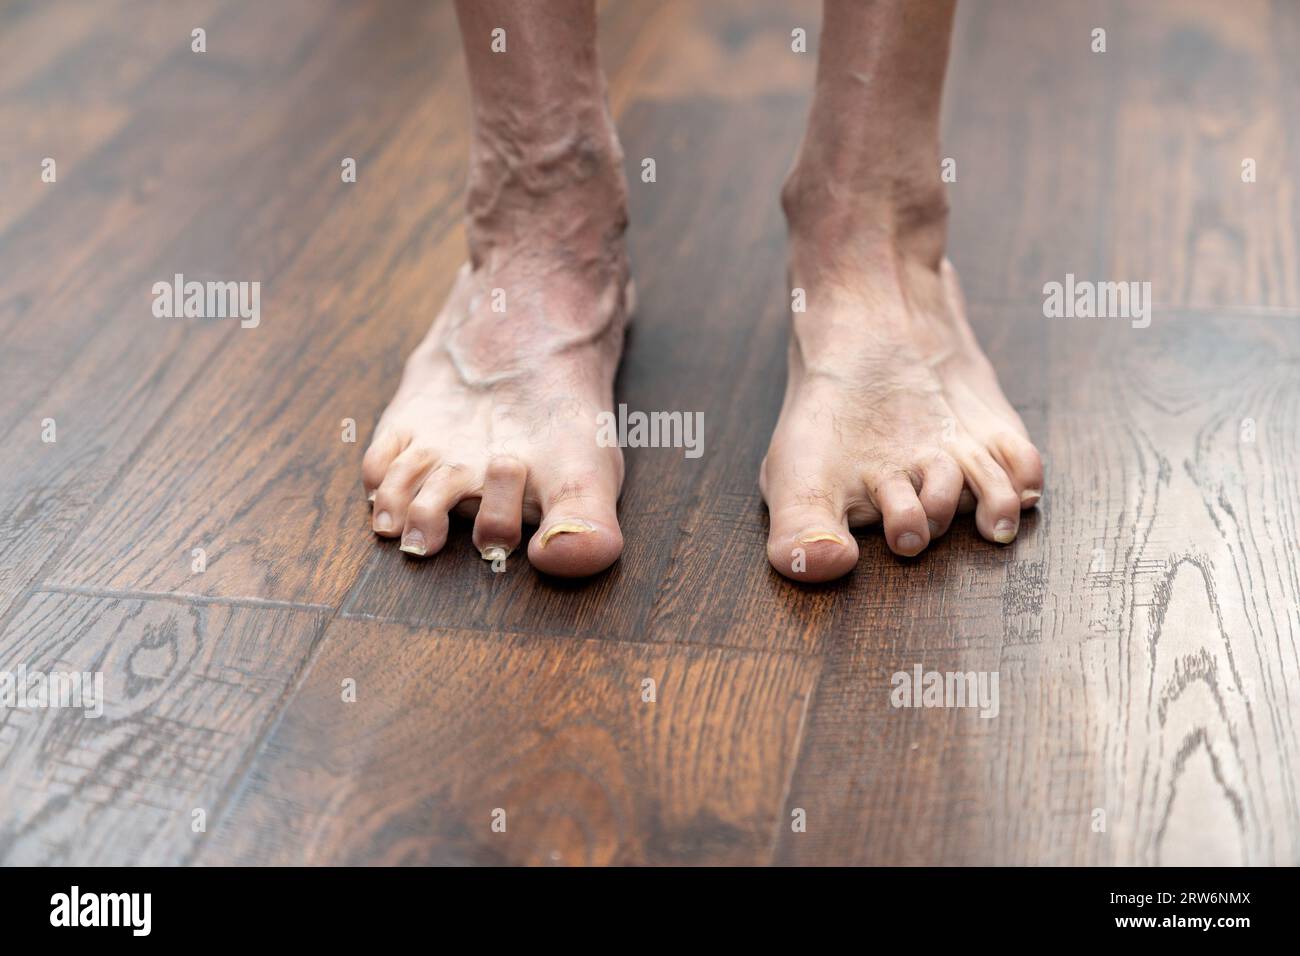 Man's deformed hammertoes showing left foot one year after surgery Stock Photo